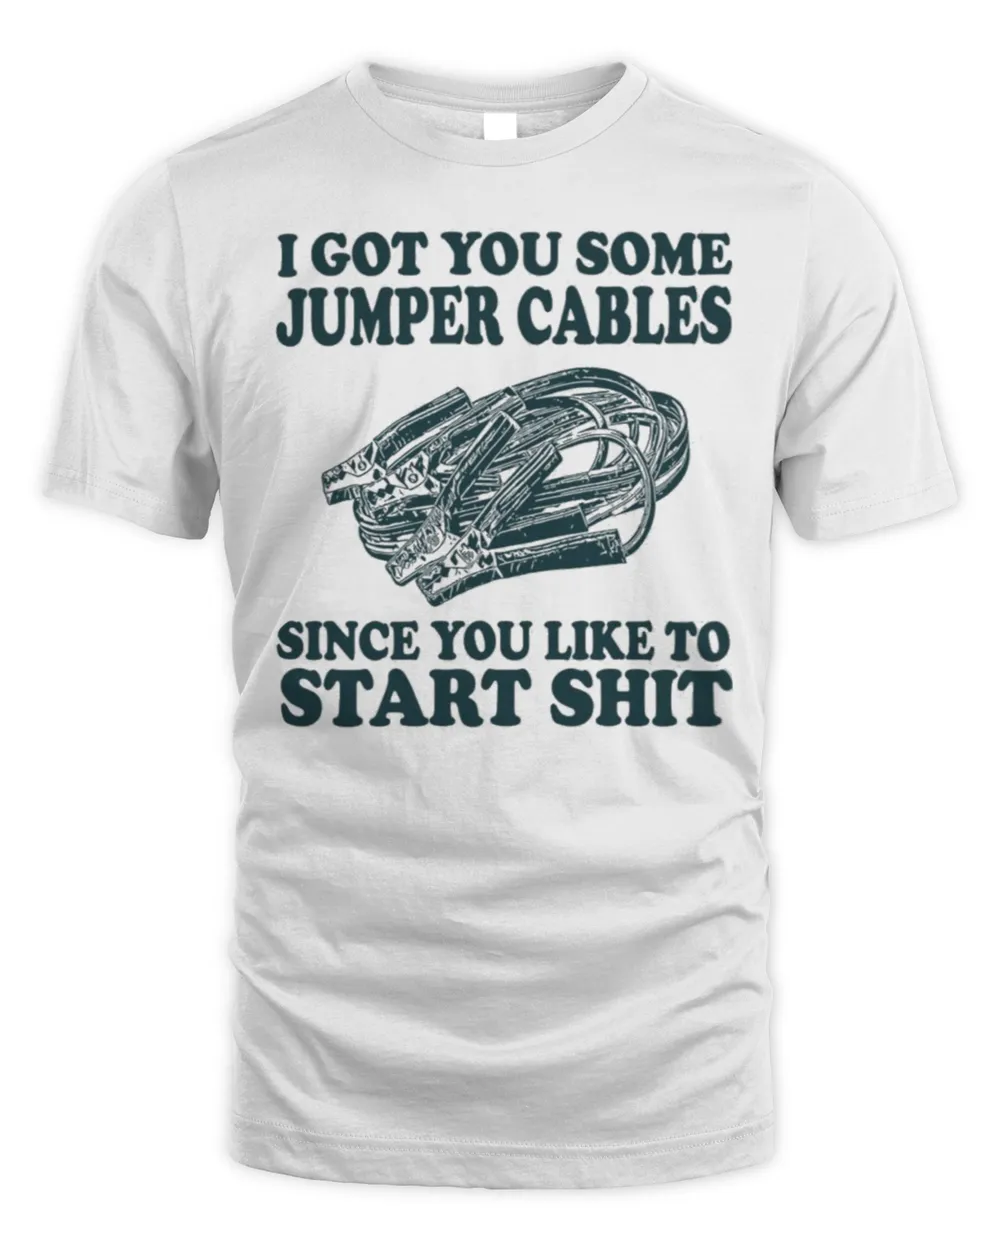 I got you some jumper cables since you like to start shit shirt